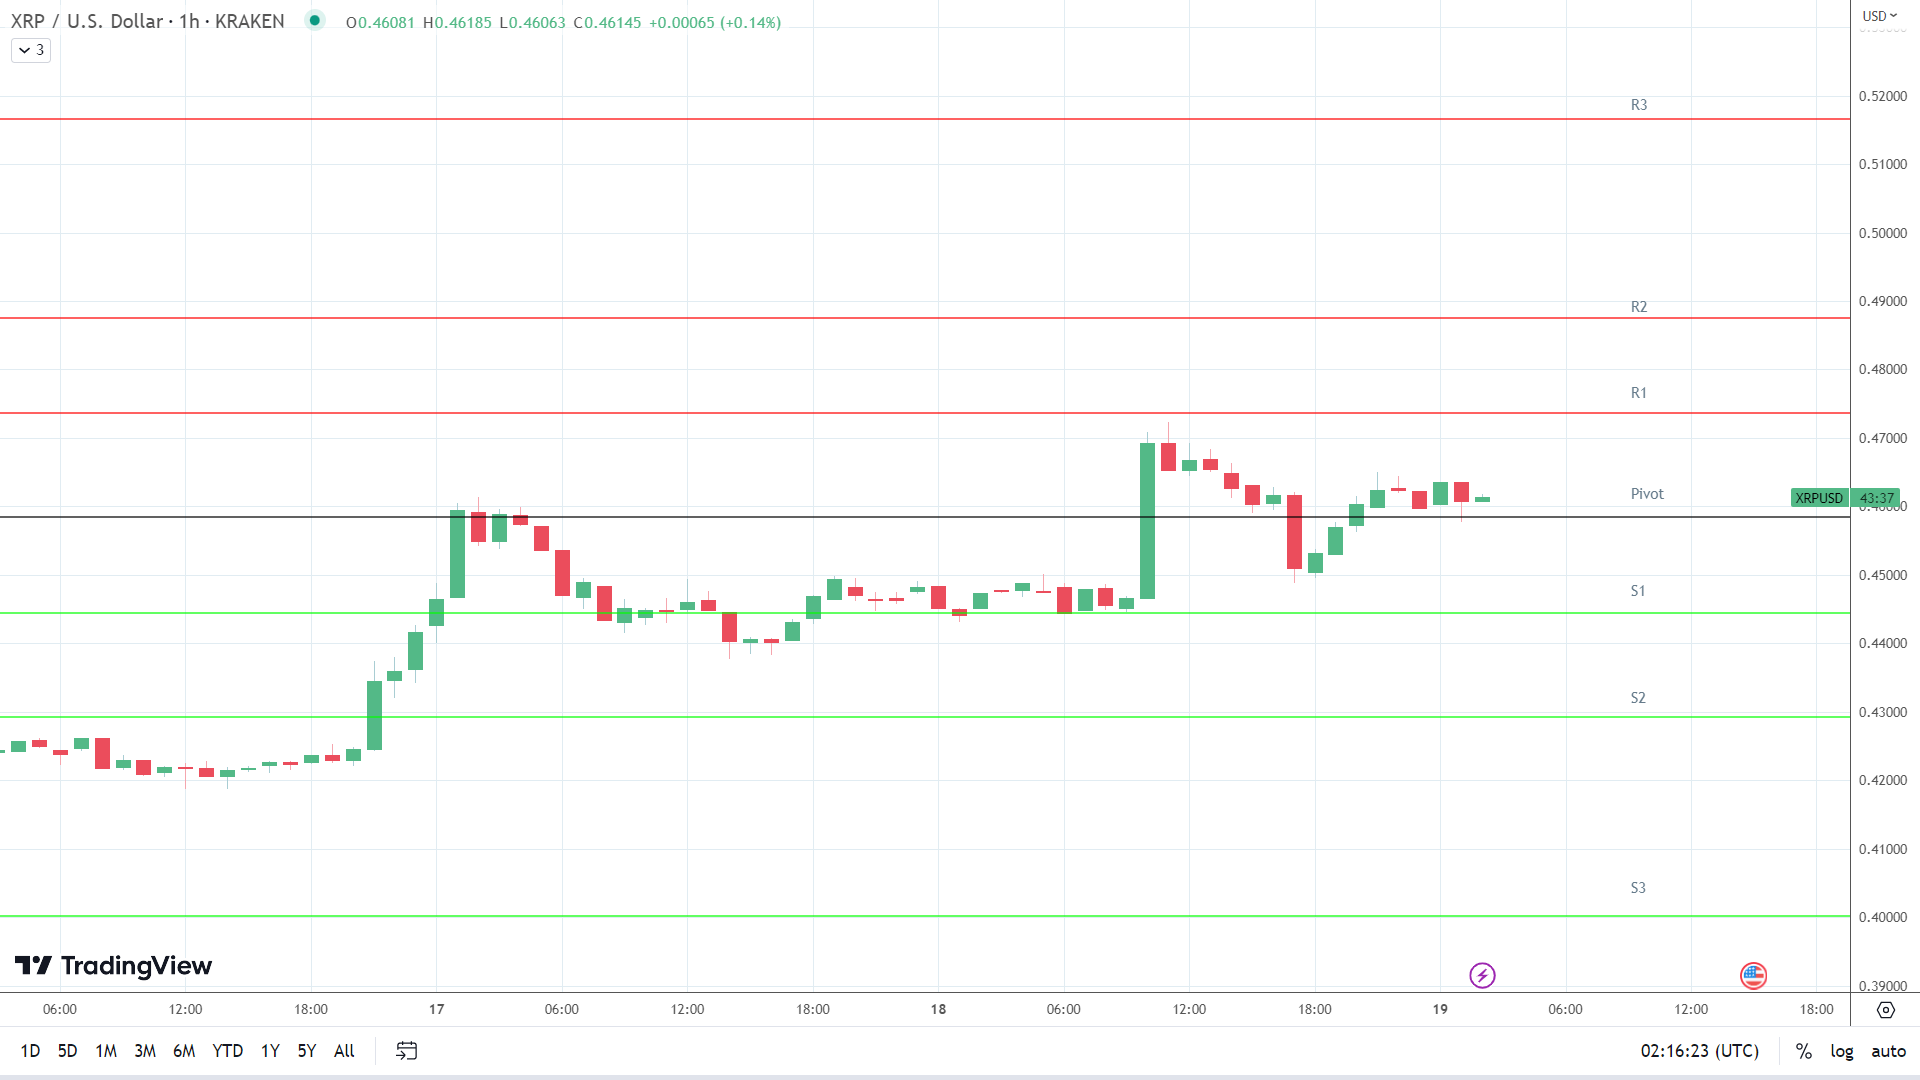 XRP resistance levels in play above the pivot.